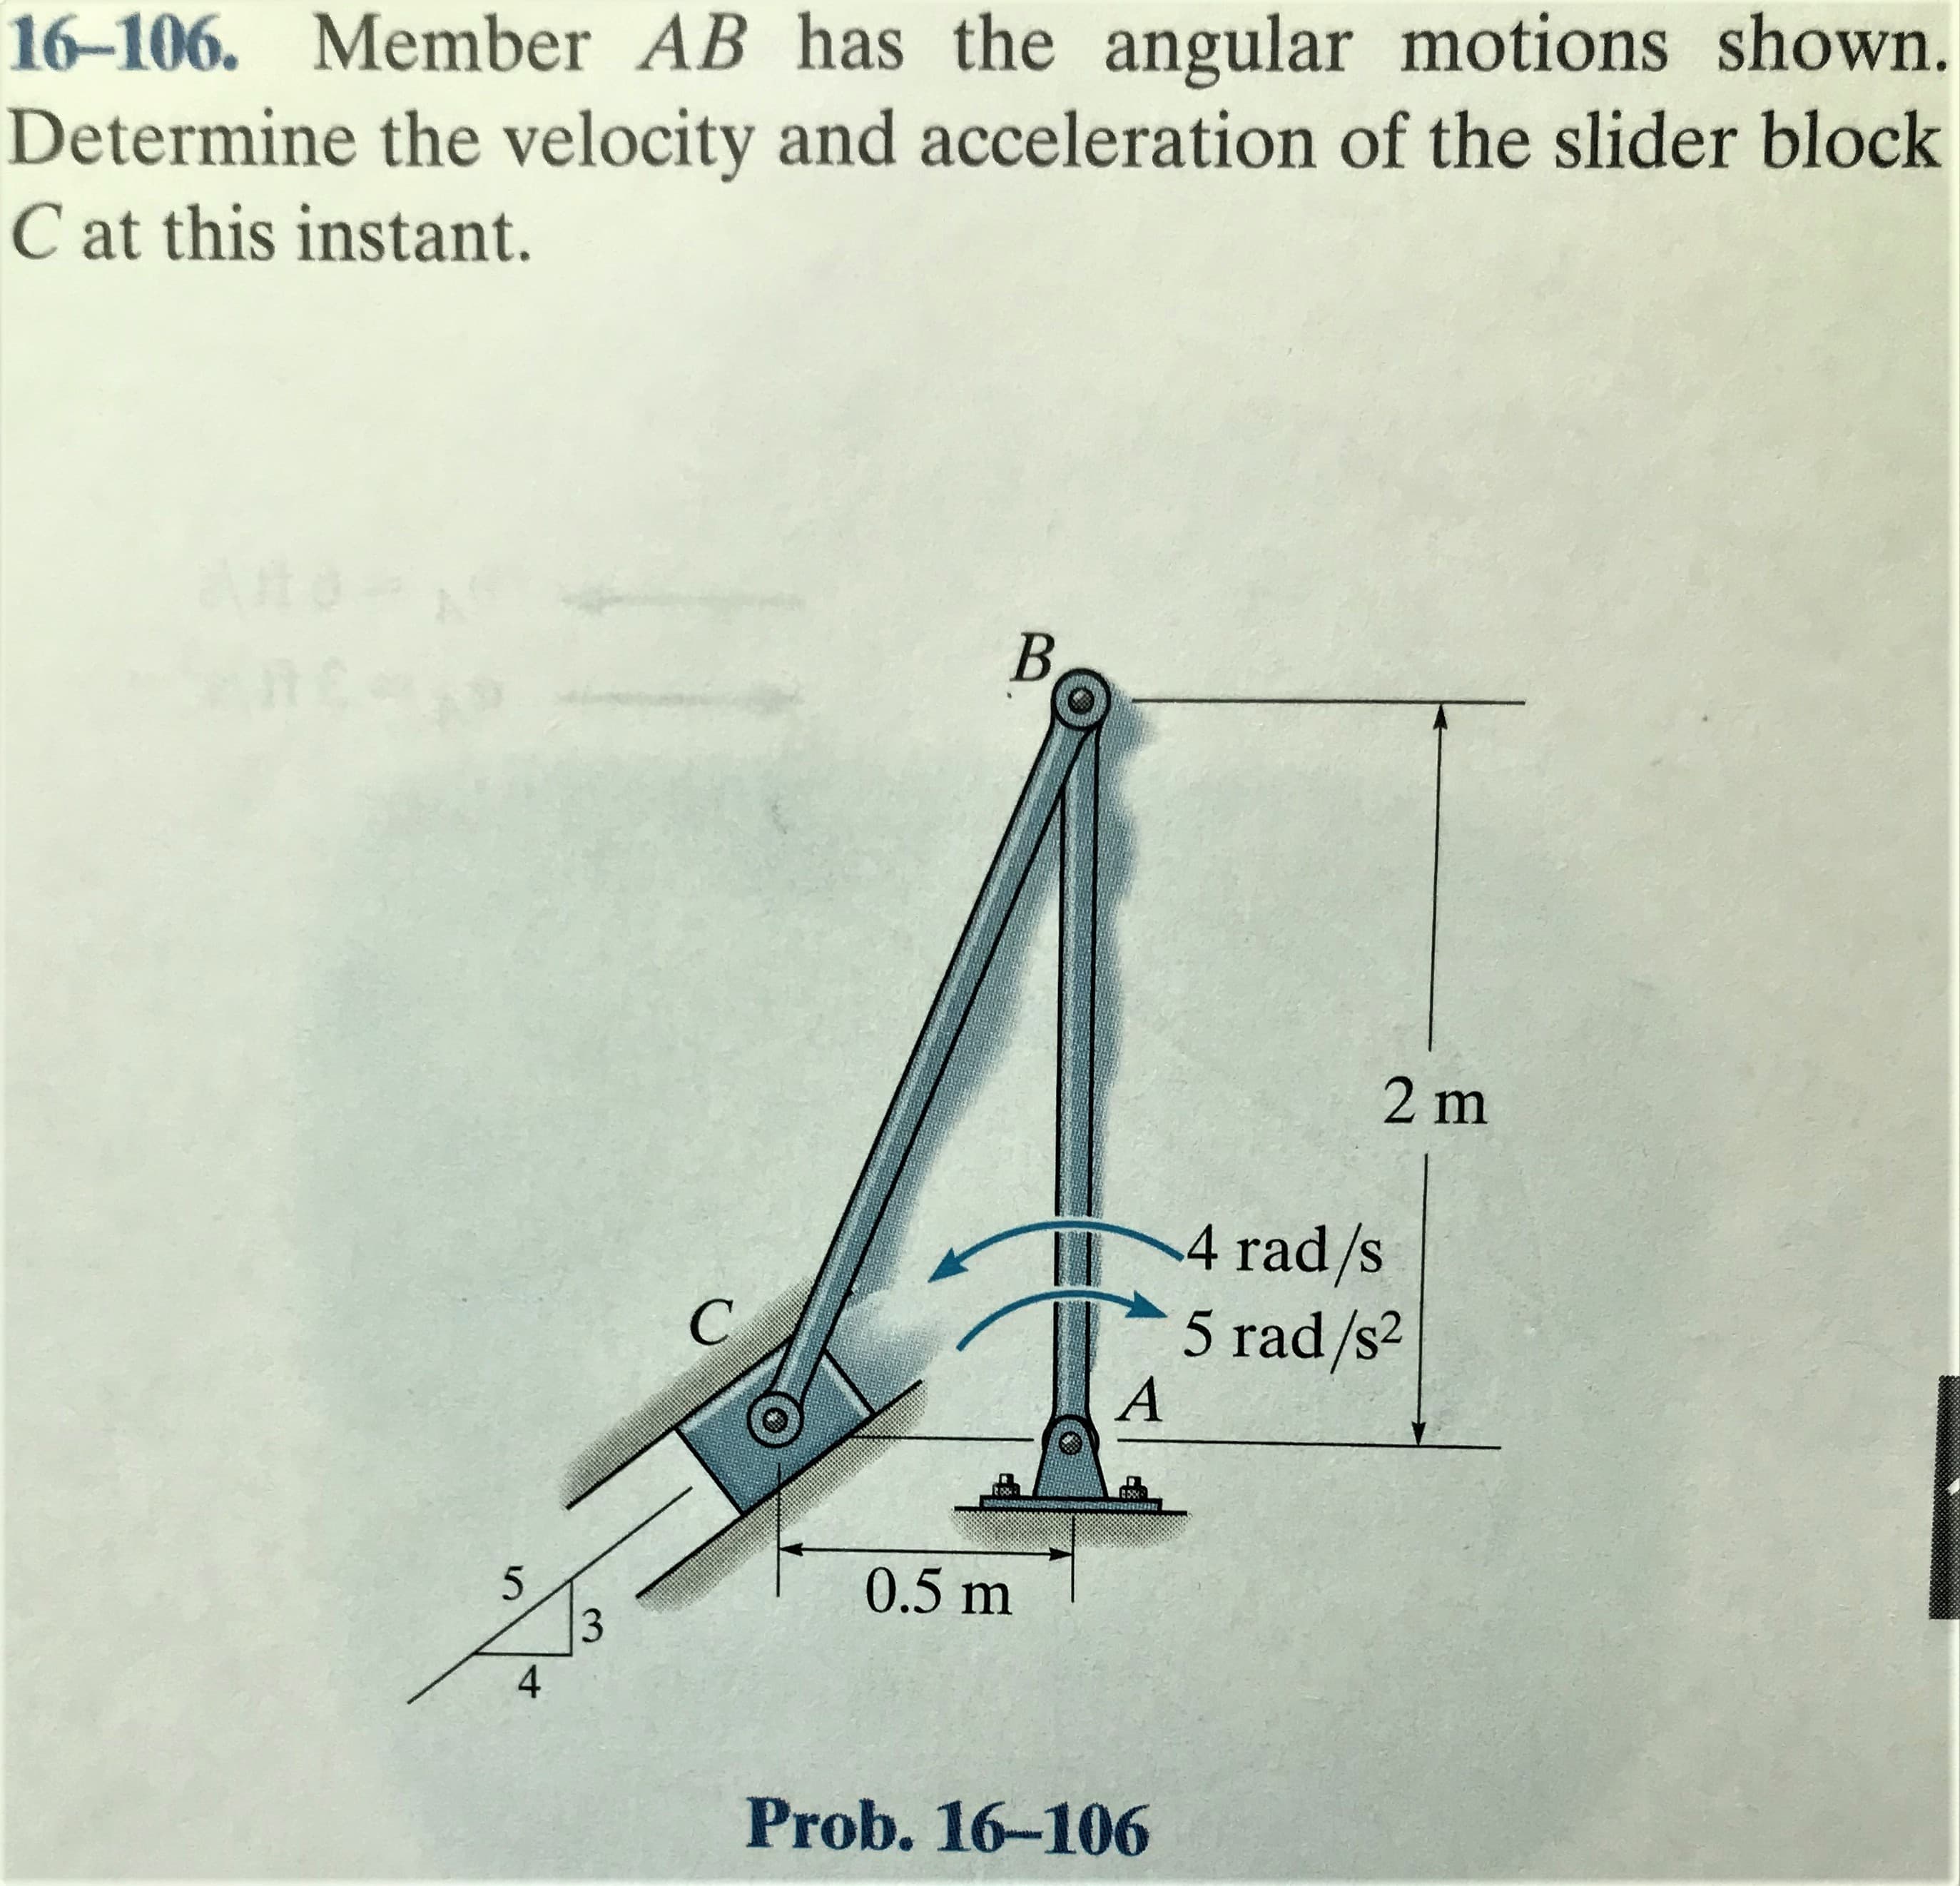 16-106. Member AB has the angular motions shown.
Determine the velocity and acceleration of the slider block
C at this instant.
B
2 m
4 rad/s
5 rad/s2
0.5 m
Prob. 16-106
